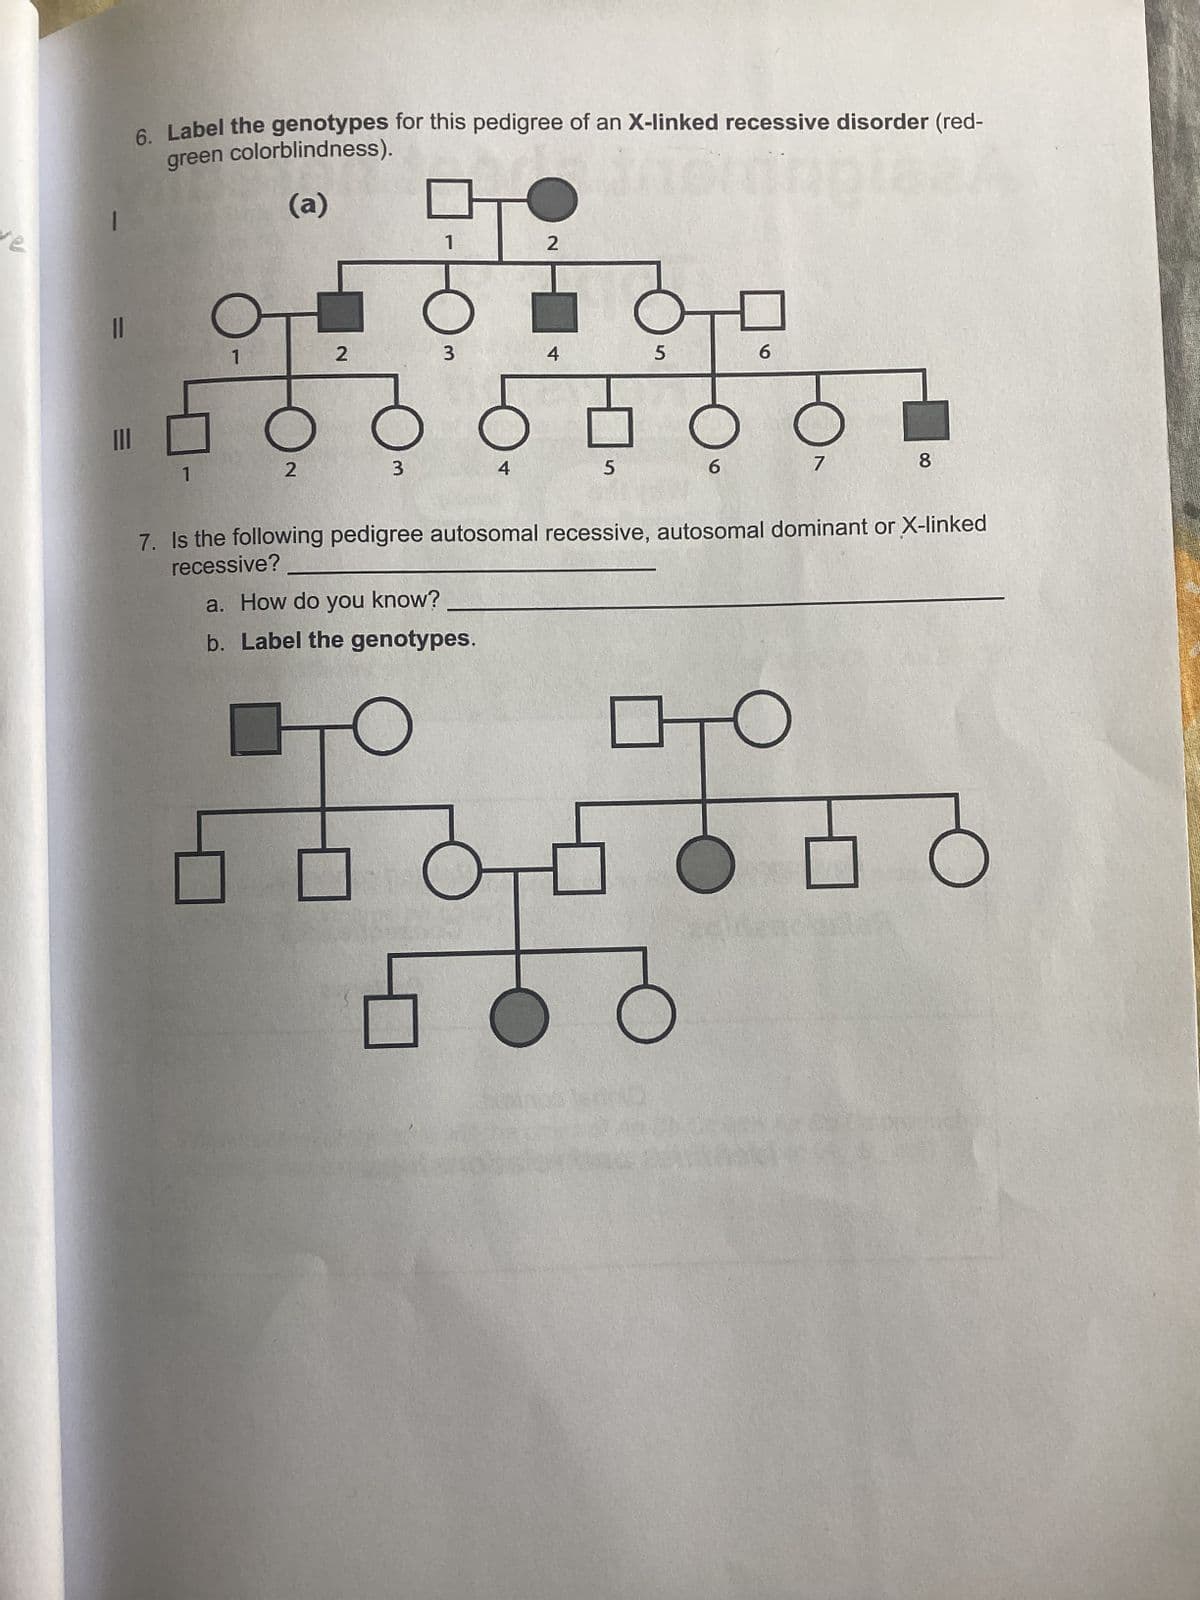 re
|||
E
6. Label the genotypes for this pedigree of an X-linked recessive disorder (red-
green colorblindness).
(a)
2
2
3
1
3
a. How do you know?
b. Label the genotypes.
4
O
To
2
4
5
5
6
6
7. Is the following pedigree autosomal recessive, autosomal dominant or X-linked
recessive?
2
8
O
T
58